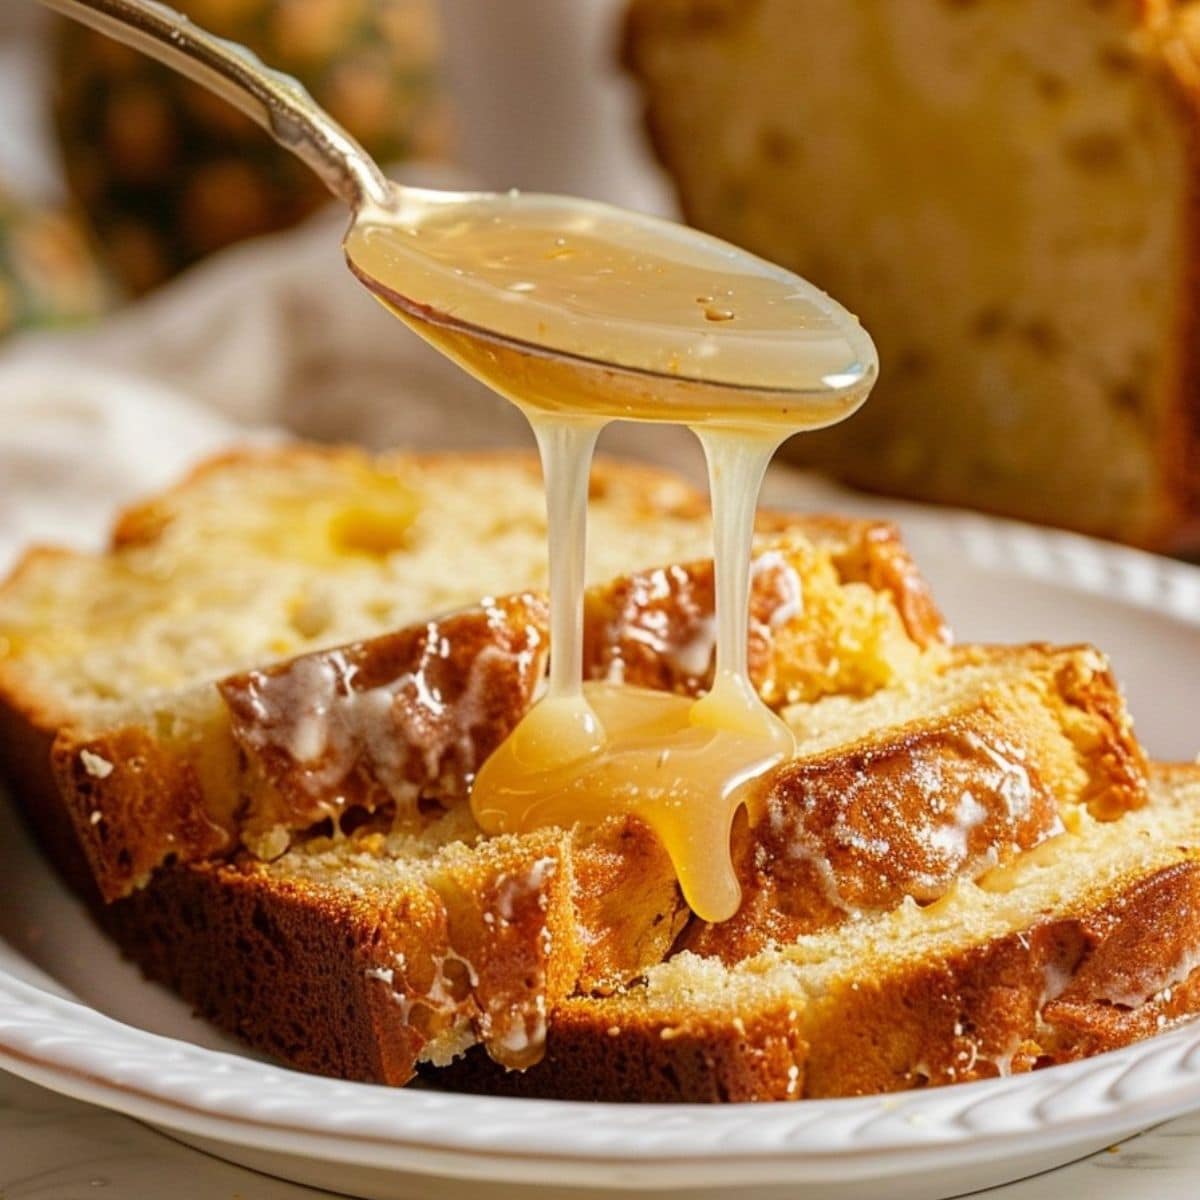 Spoonful of sugar glaze poured over slices of pineapple quick bread served in a white plate.